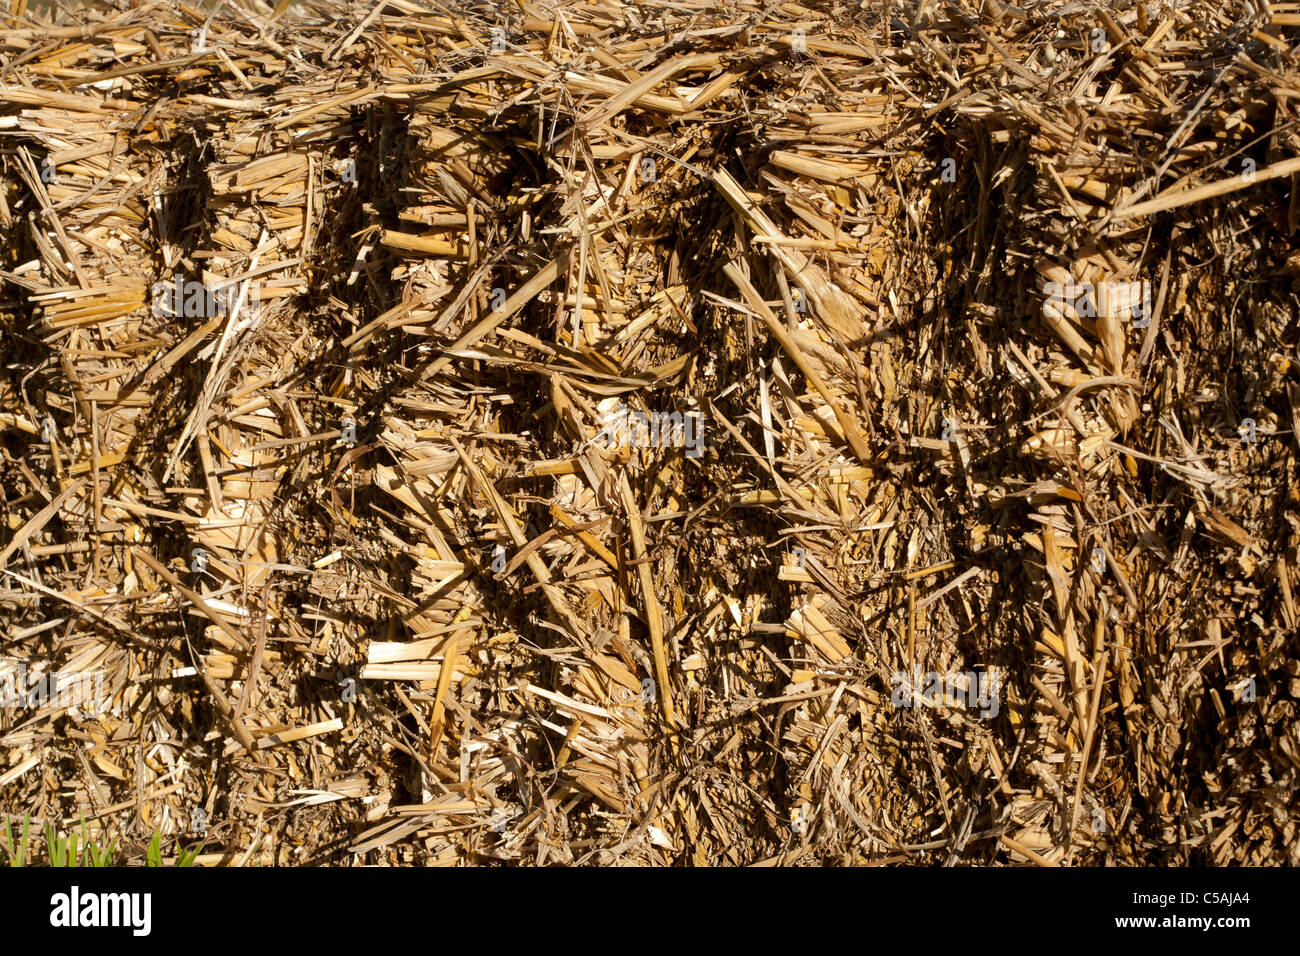 Straw bale , close up of side view Stock Photo